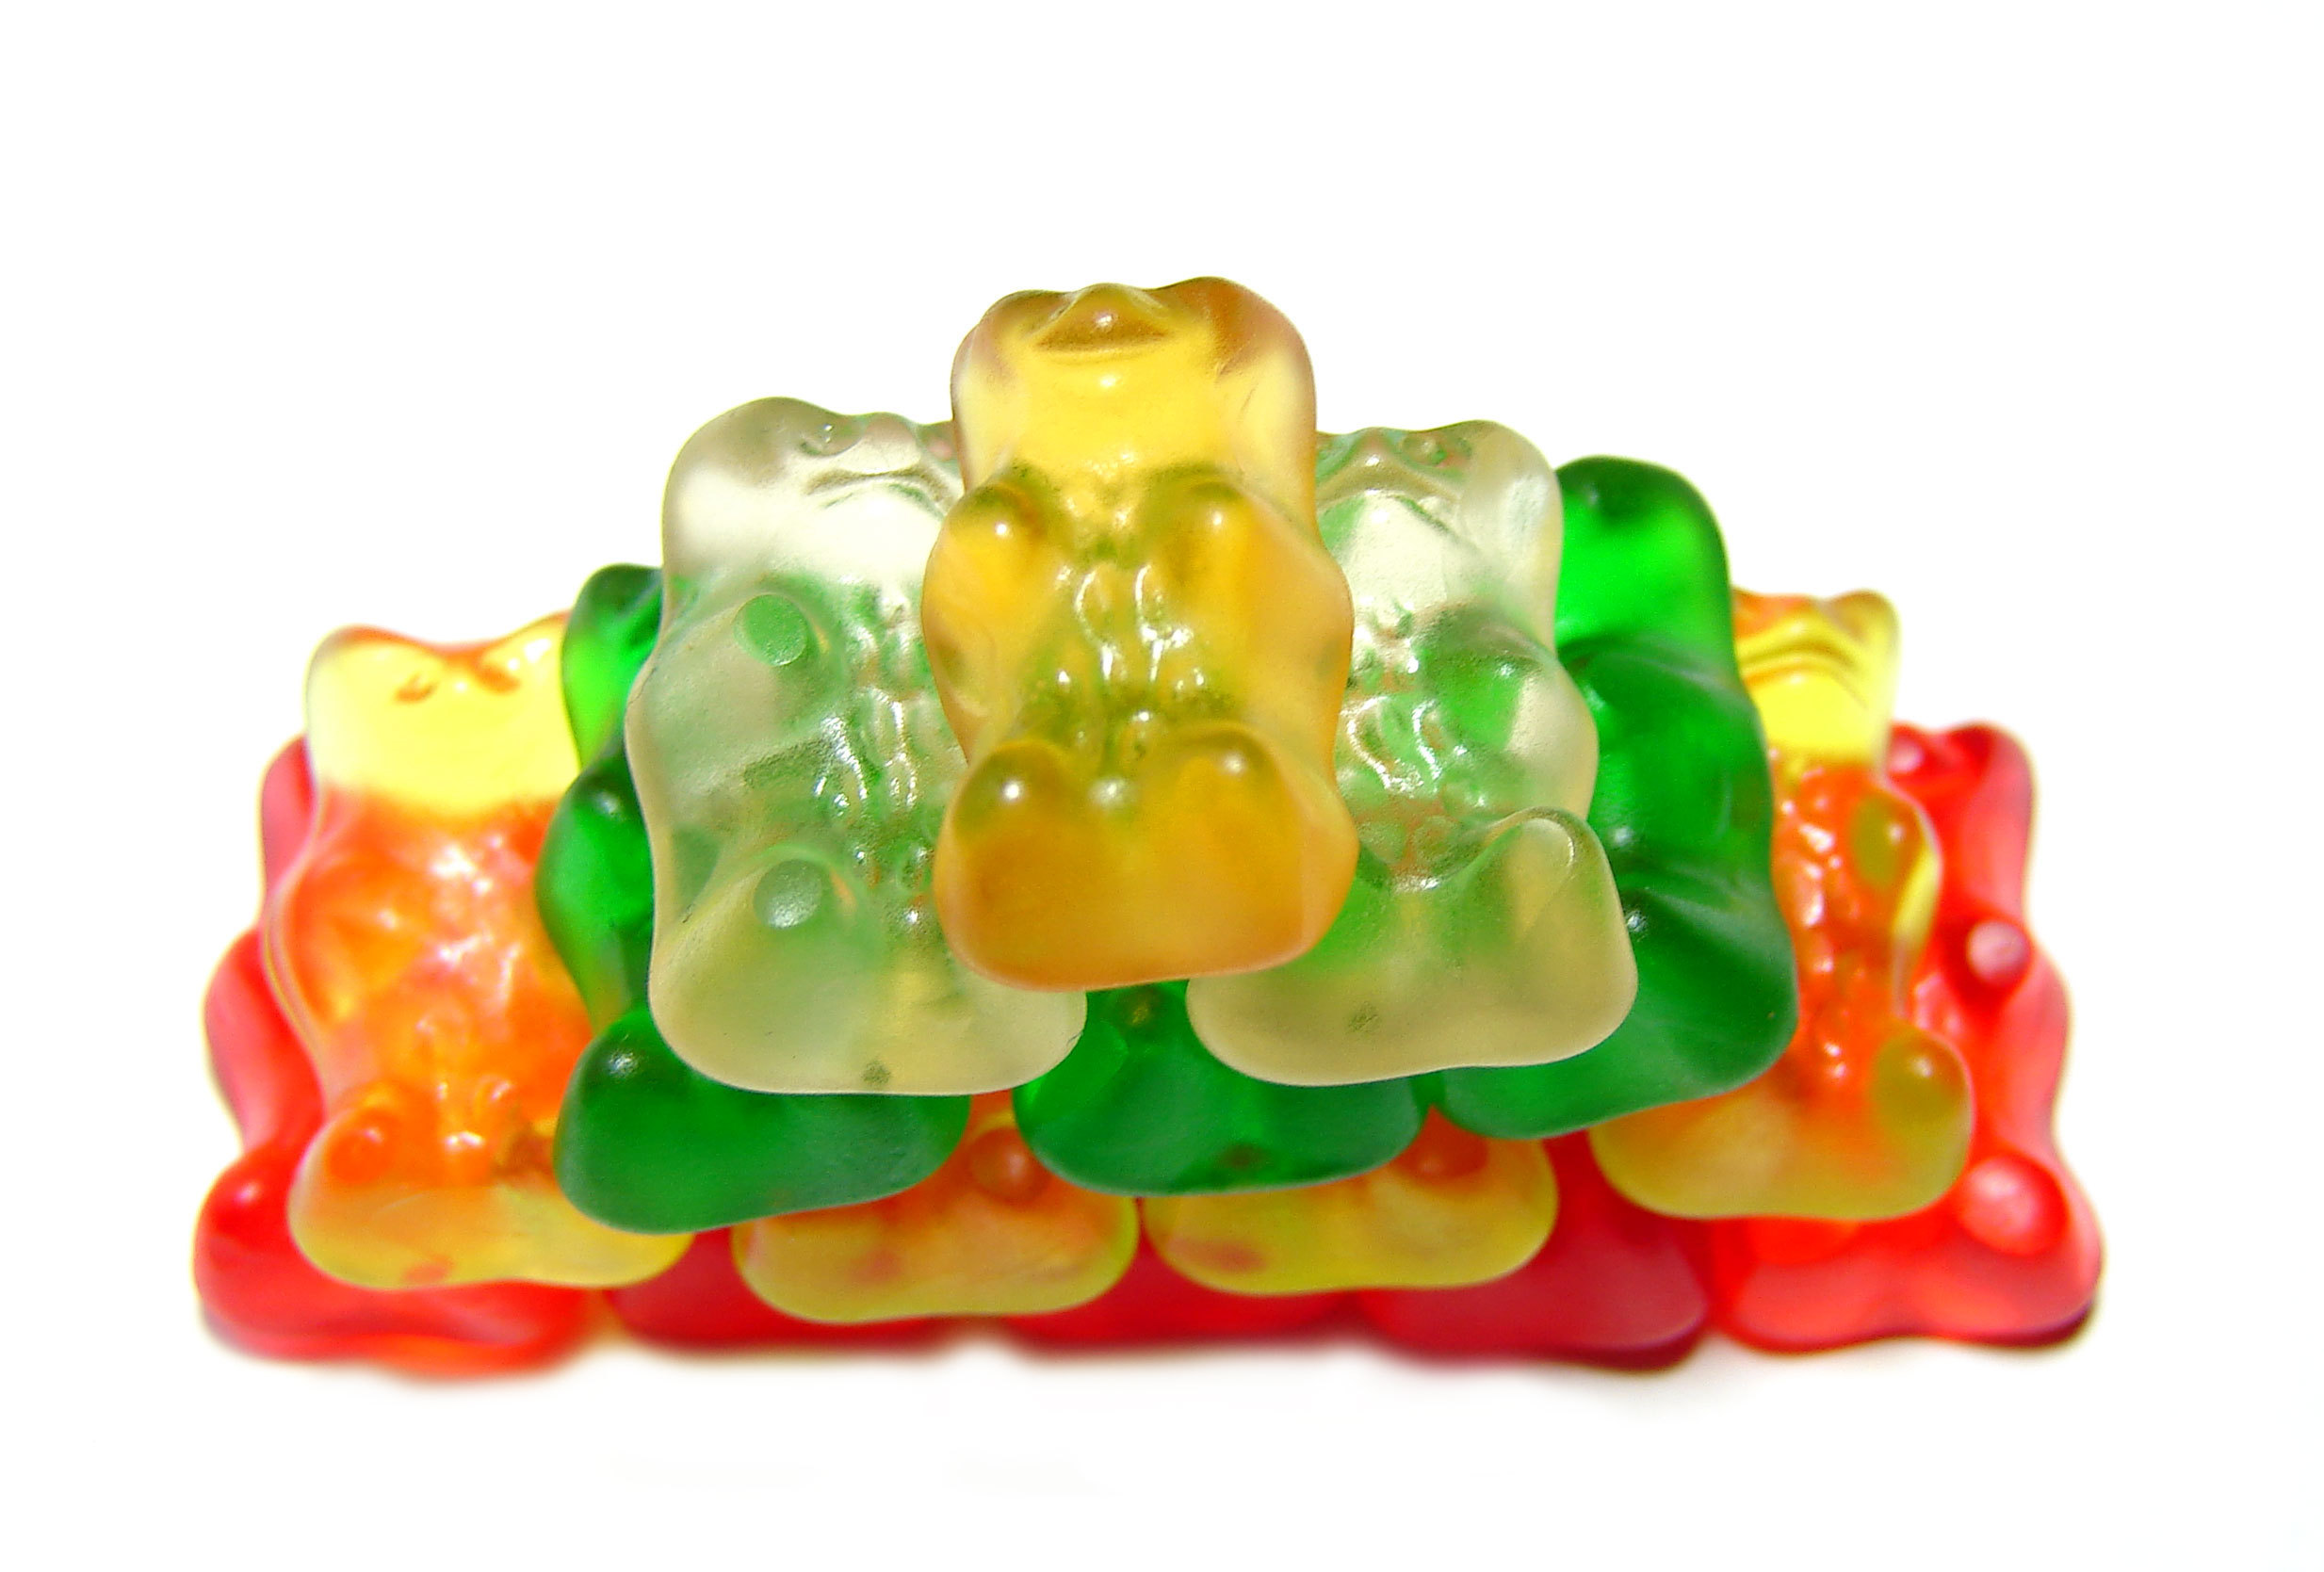 Are there any dietary restrictions or allergies to consider when consuming edible HHC gummies?